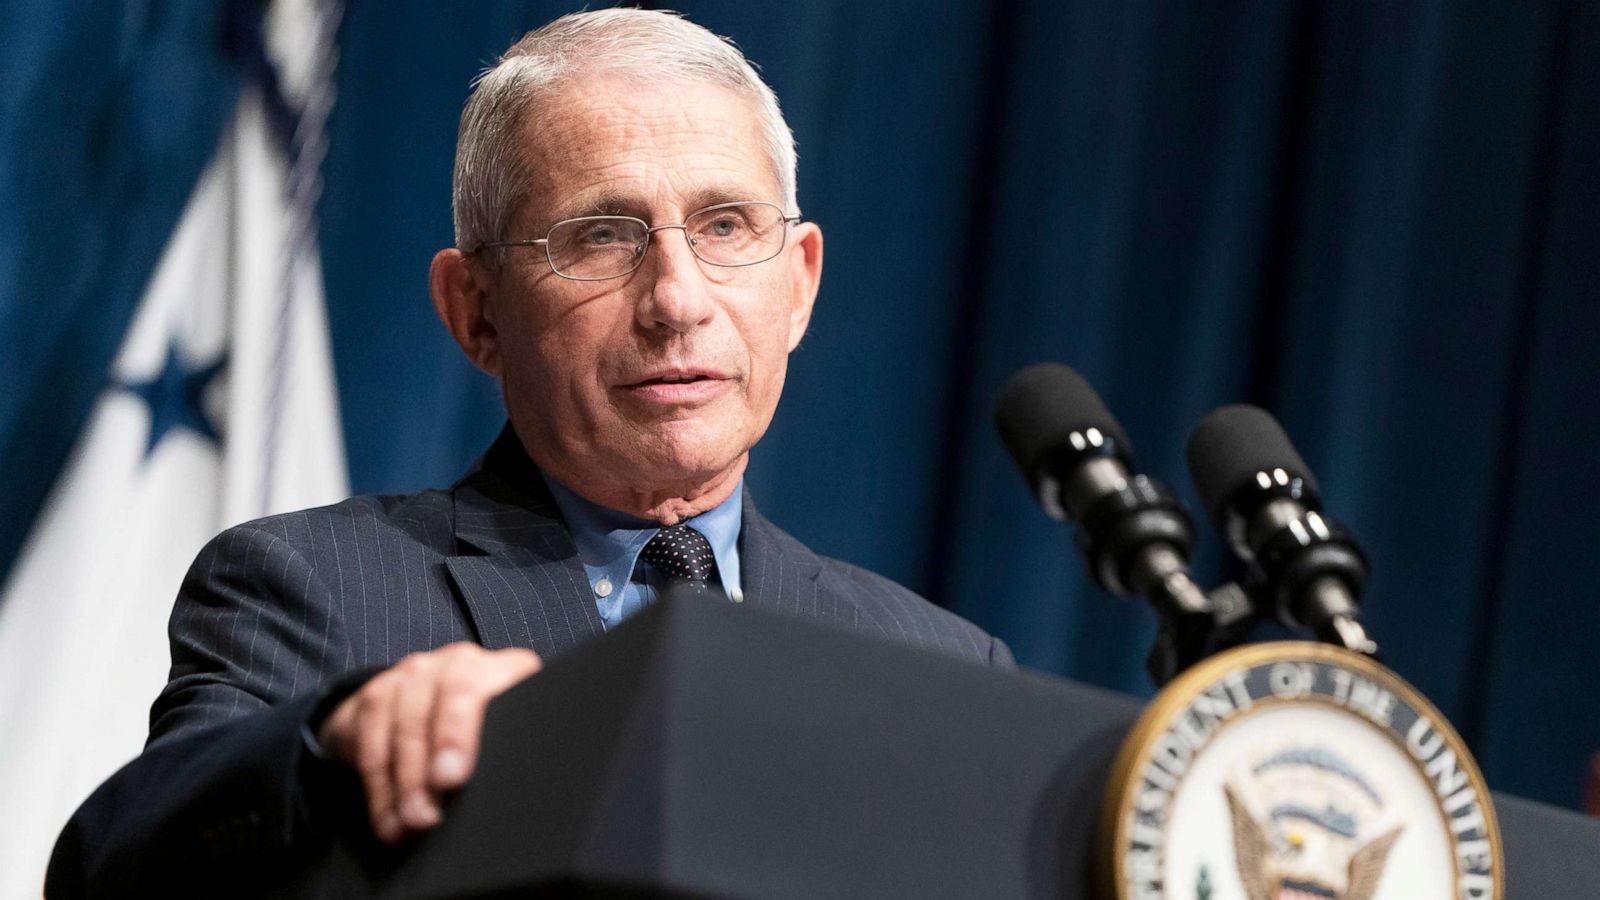 this-week-anthony-fauci-03-gty-llr-211002_1633194581269_hpmain_16x9_1600-3856940